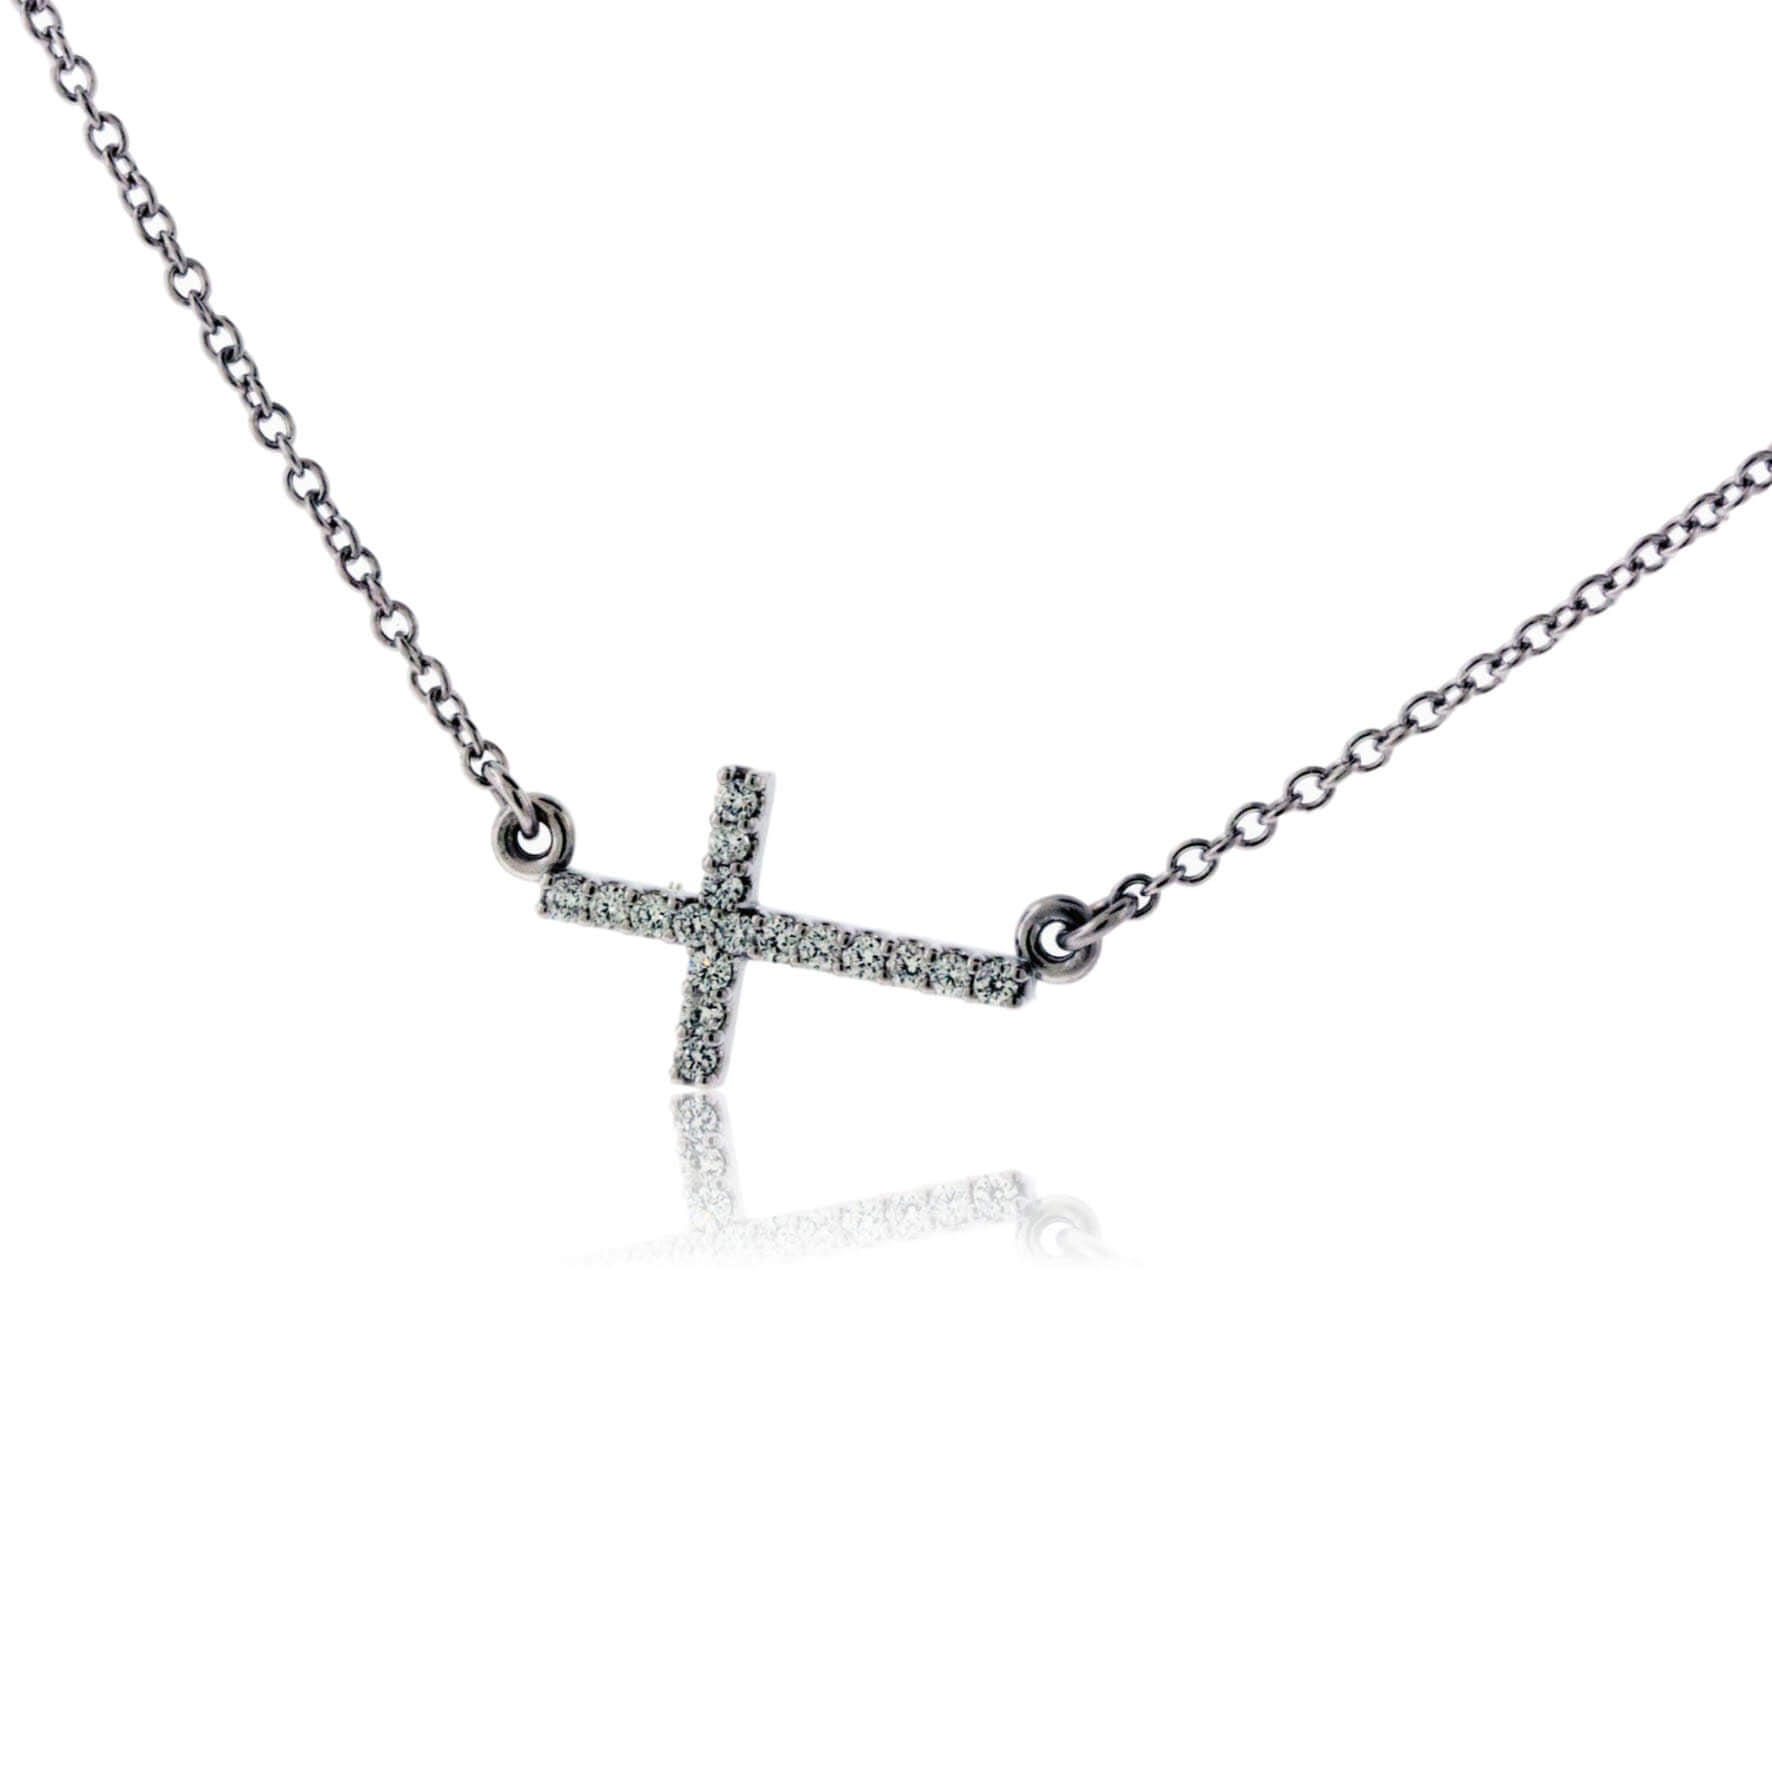 Zancan silver necklace with cross pendant and black stones.